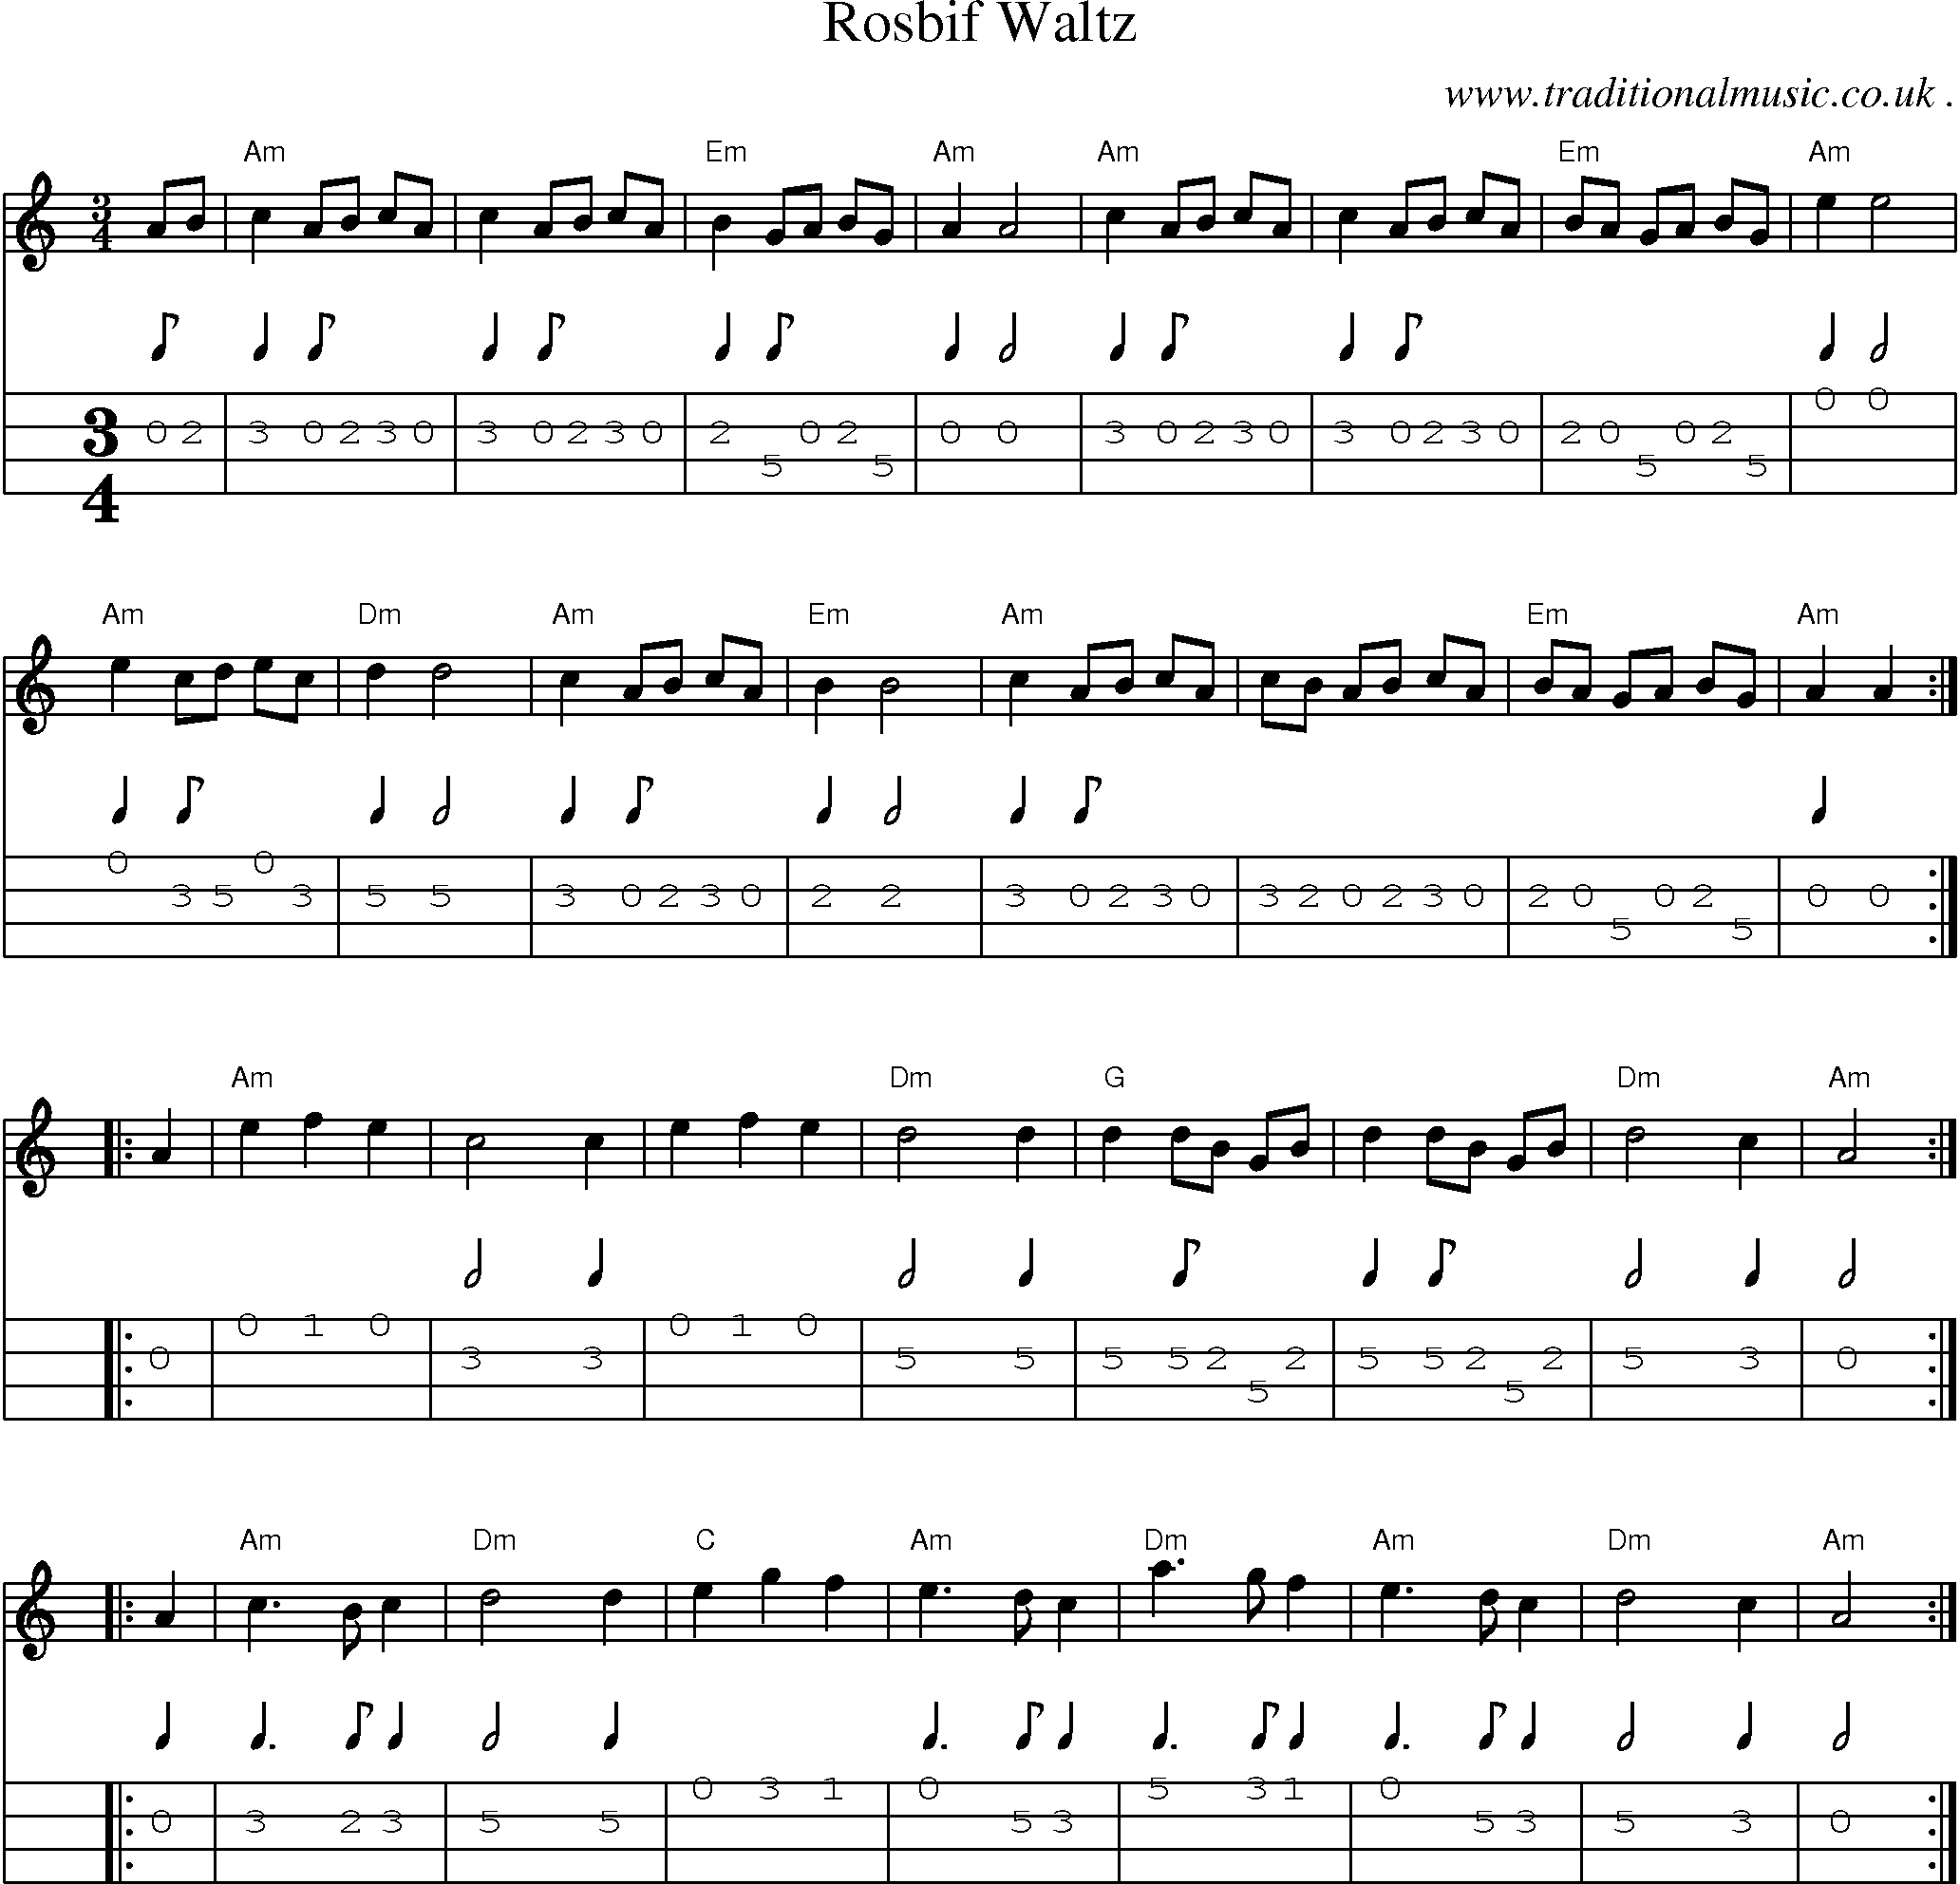 Music Score and Guitar Tabs for Rosbif Waltz